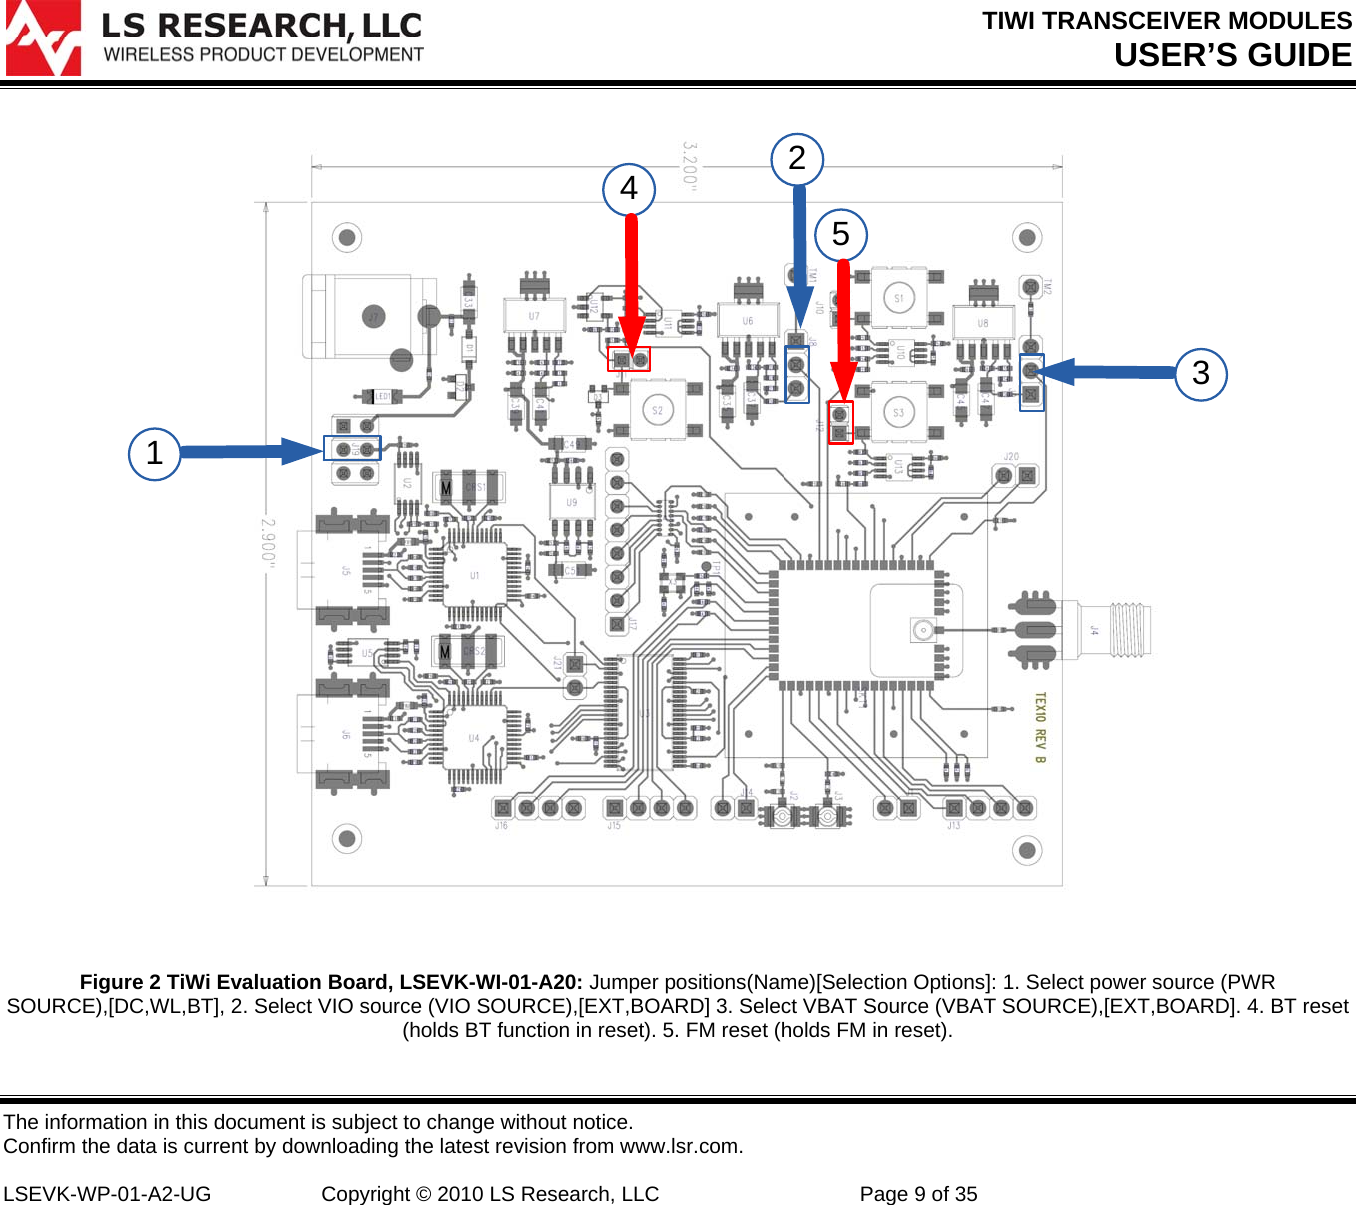 TIWI TRANSCEIVER MODULES USER’S GUIDE The information in this document is subject to change without notice. Confirm the data is current by downloading the latest revision from www.lsr.com.  LSEVK-WP-01-A2-UG  Copyright © 2010 LS Research, LLC  Page 9 of 35 12345 Figure 2 TiWi Evaluation Board, LSEVK-WI-01-A20: Jumper positions(Name)[Selection Options]: 1. Select power source (PWR SOURCE),[DC,WL,BT], 2. Select VIO source (VIO SOURCE),[EXT,BOARD] 3. Select VBAT Source (VBAT SOURCE),[EXT,BOARD]. 4. BT reset (holds BT function in reset). 5. FM reset (holds FM in reset).  